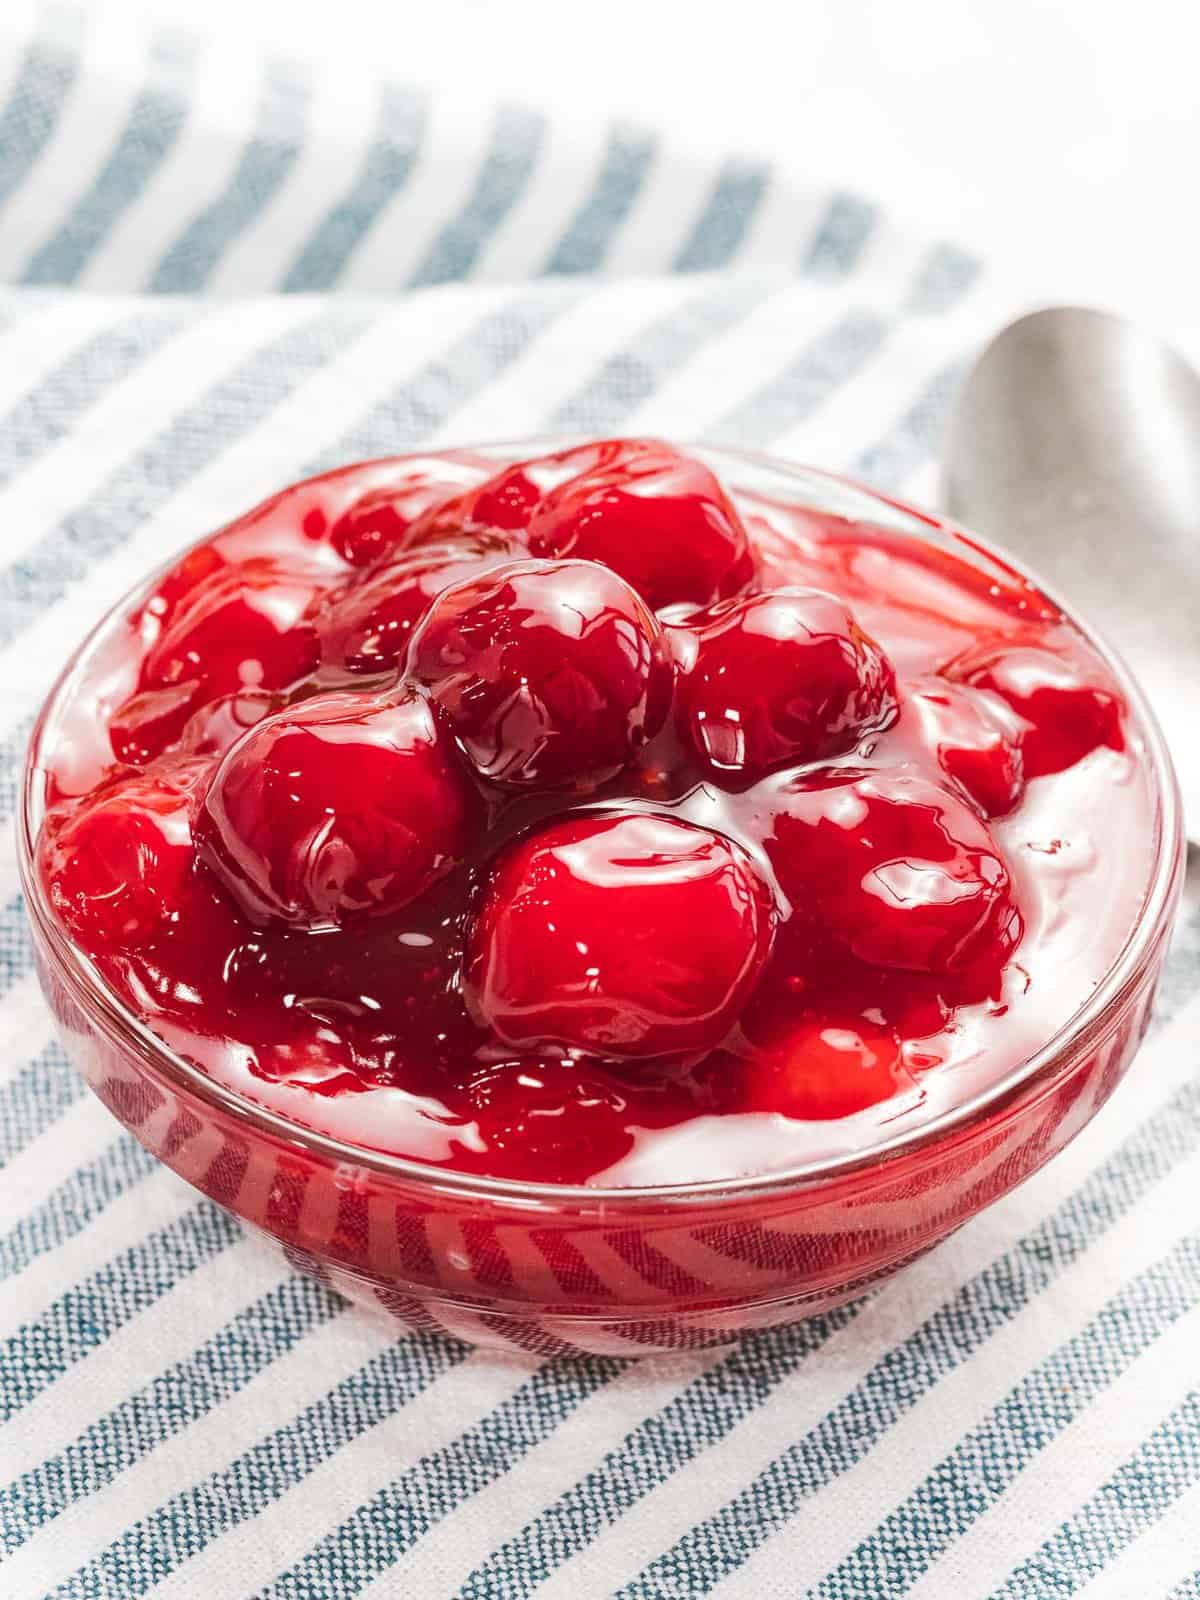 Cherry sauce used for topping desserts like cheesecake and cake.